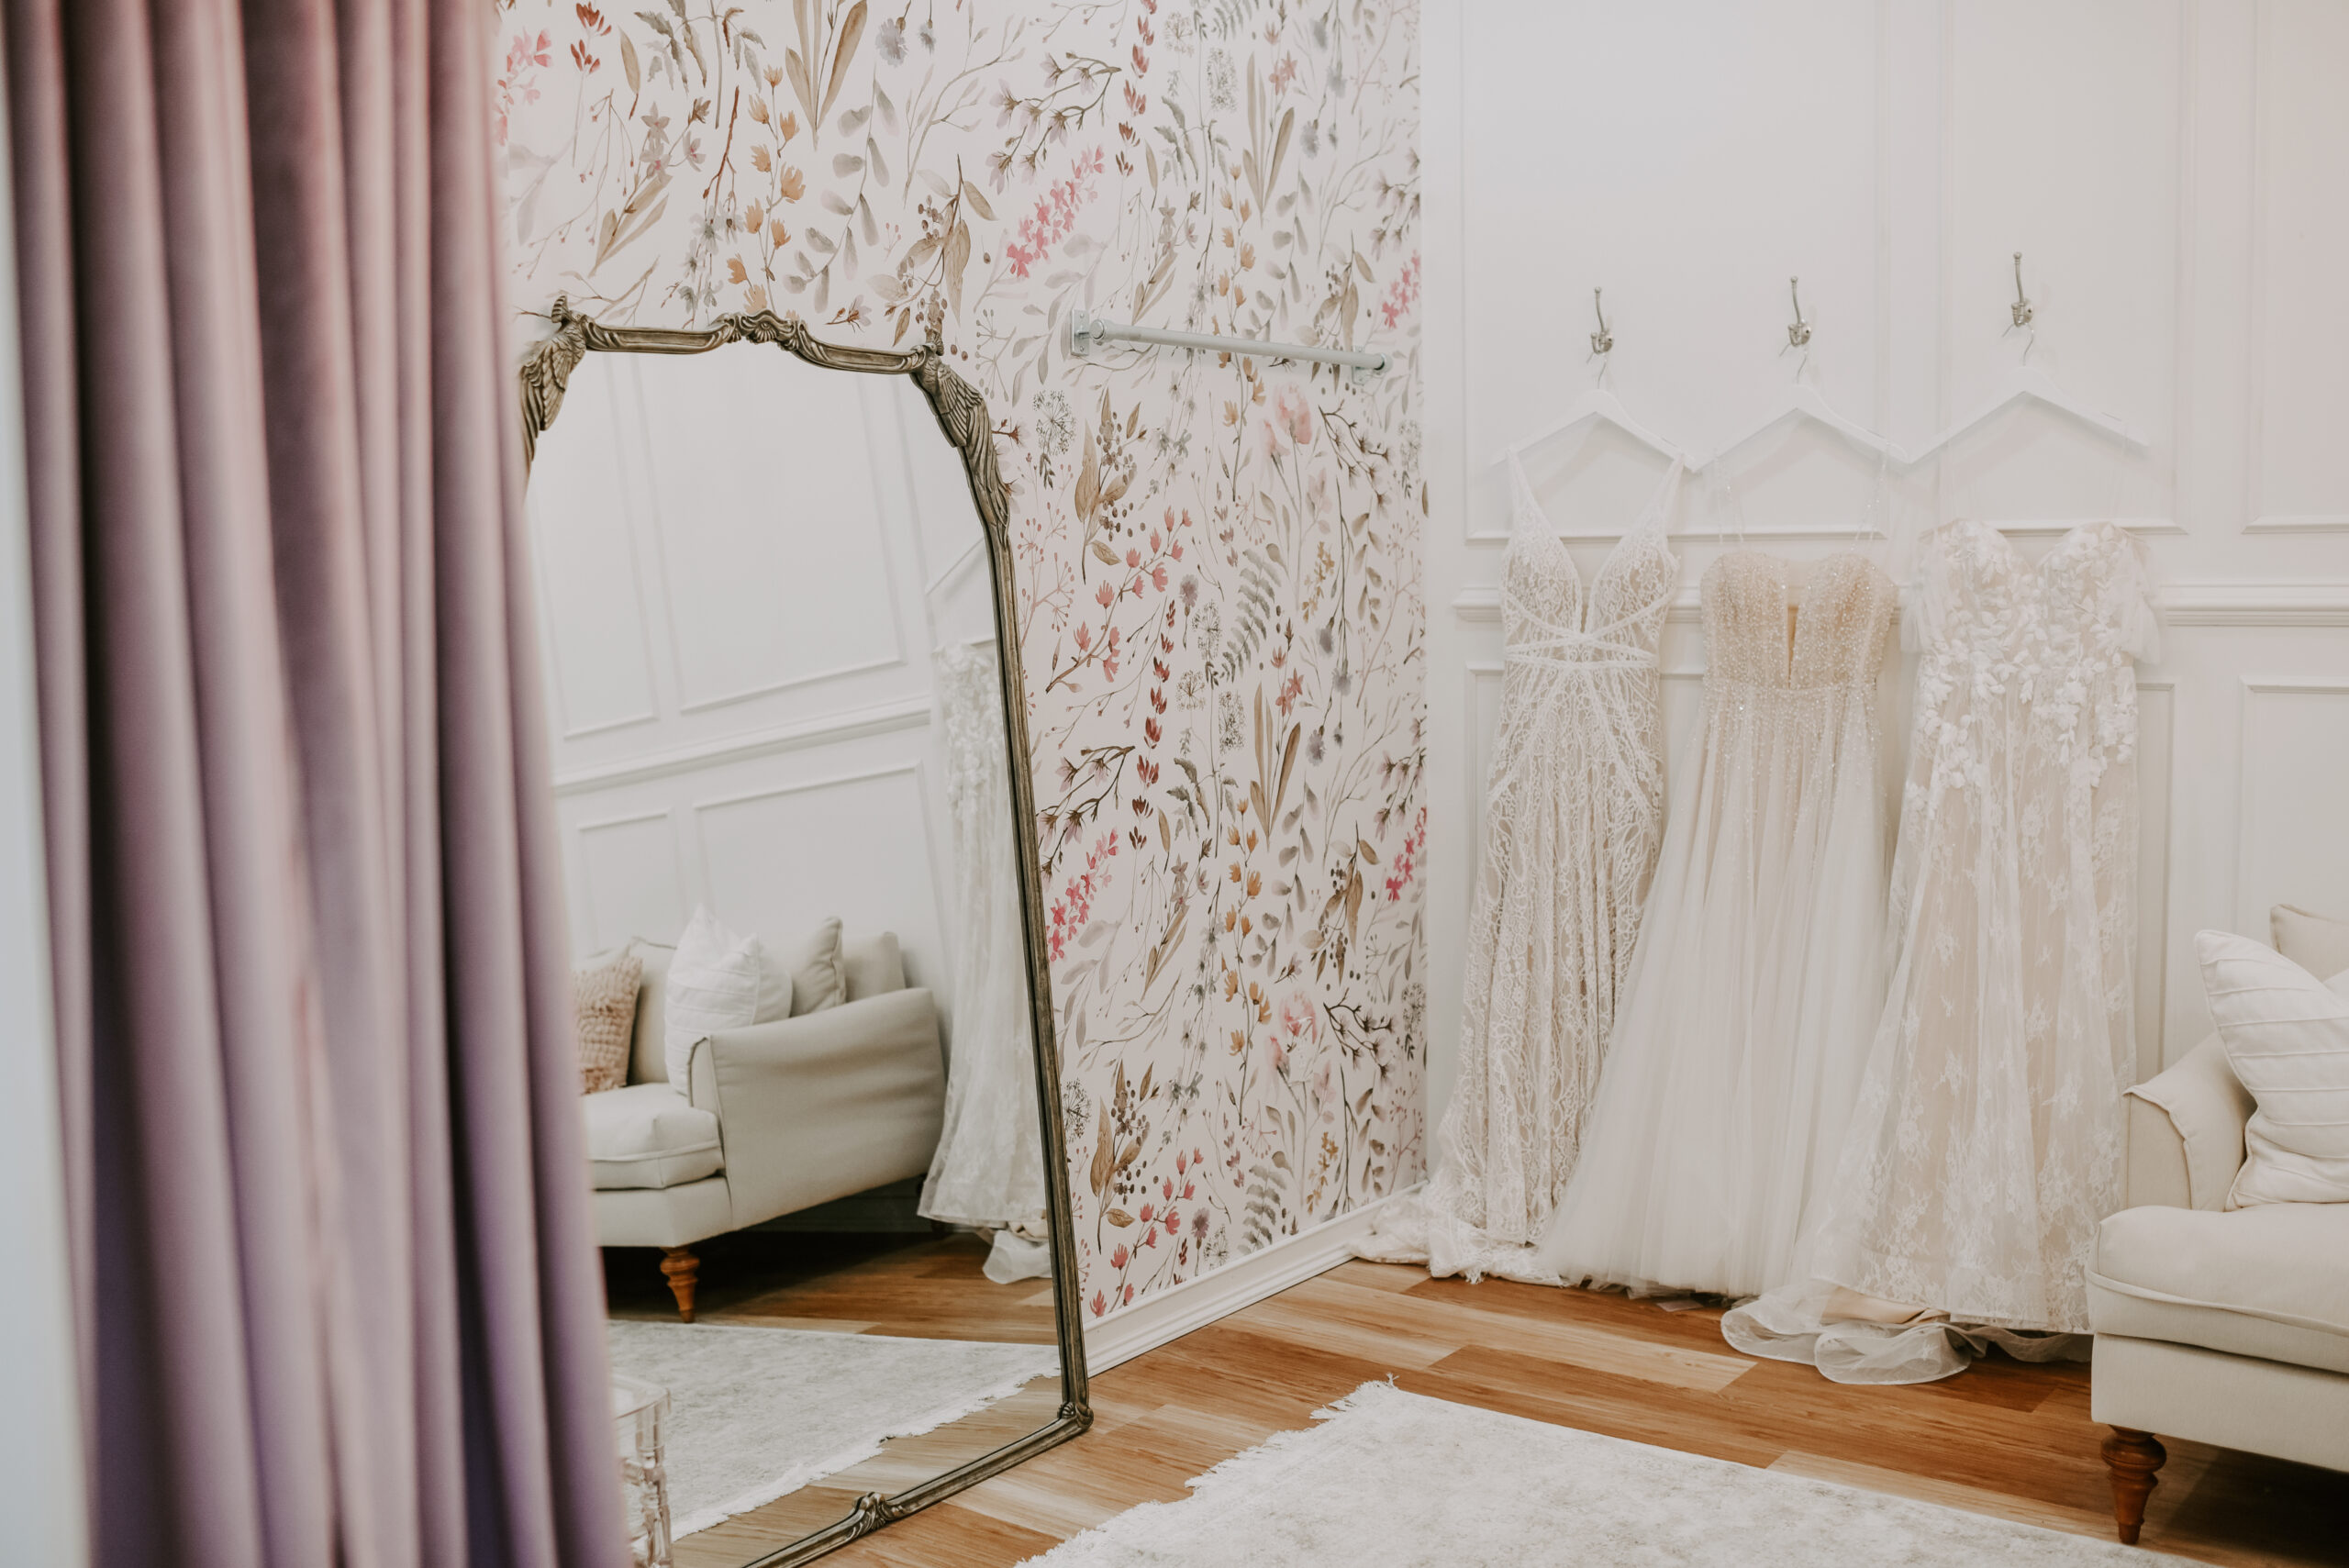 Why You Should Buy Your Wedding Gown From A Small Business